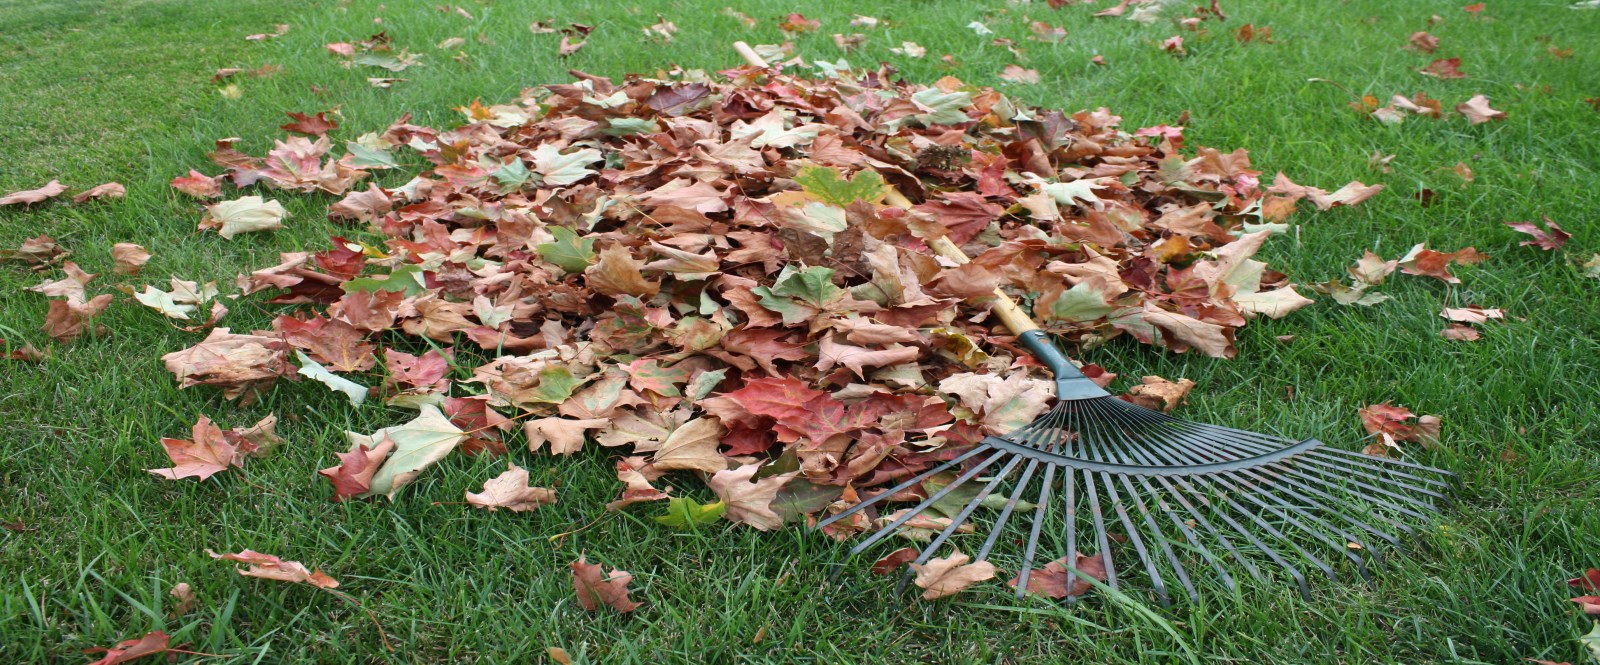 Leaf and Yard Waste collection to start on April 11